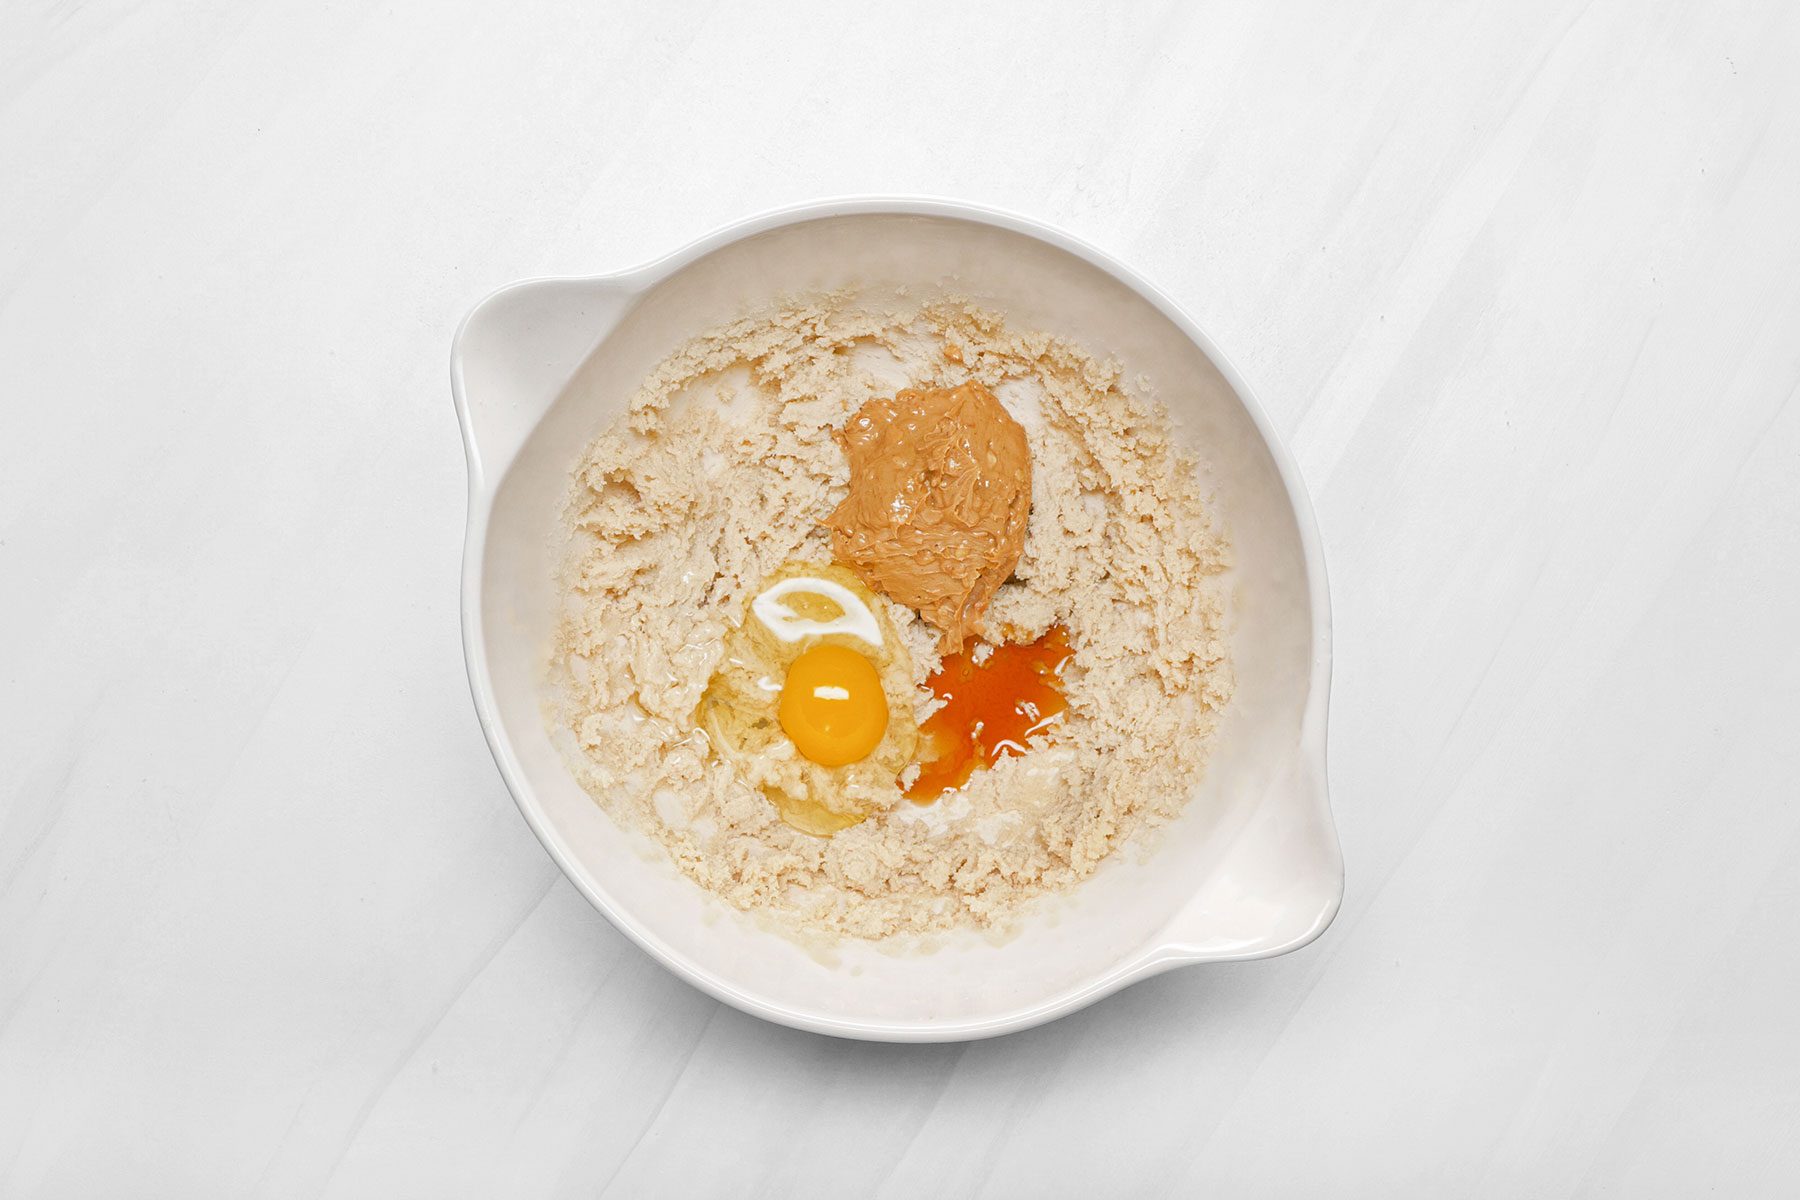 Egg, peanut butter and oats in bowl